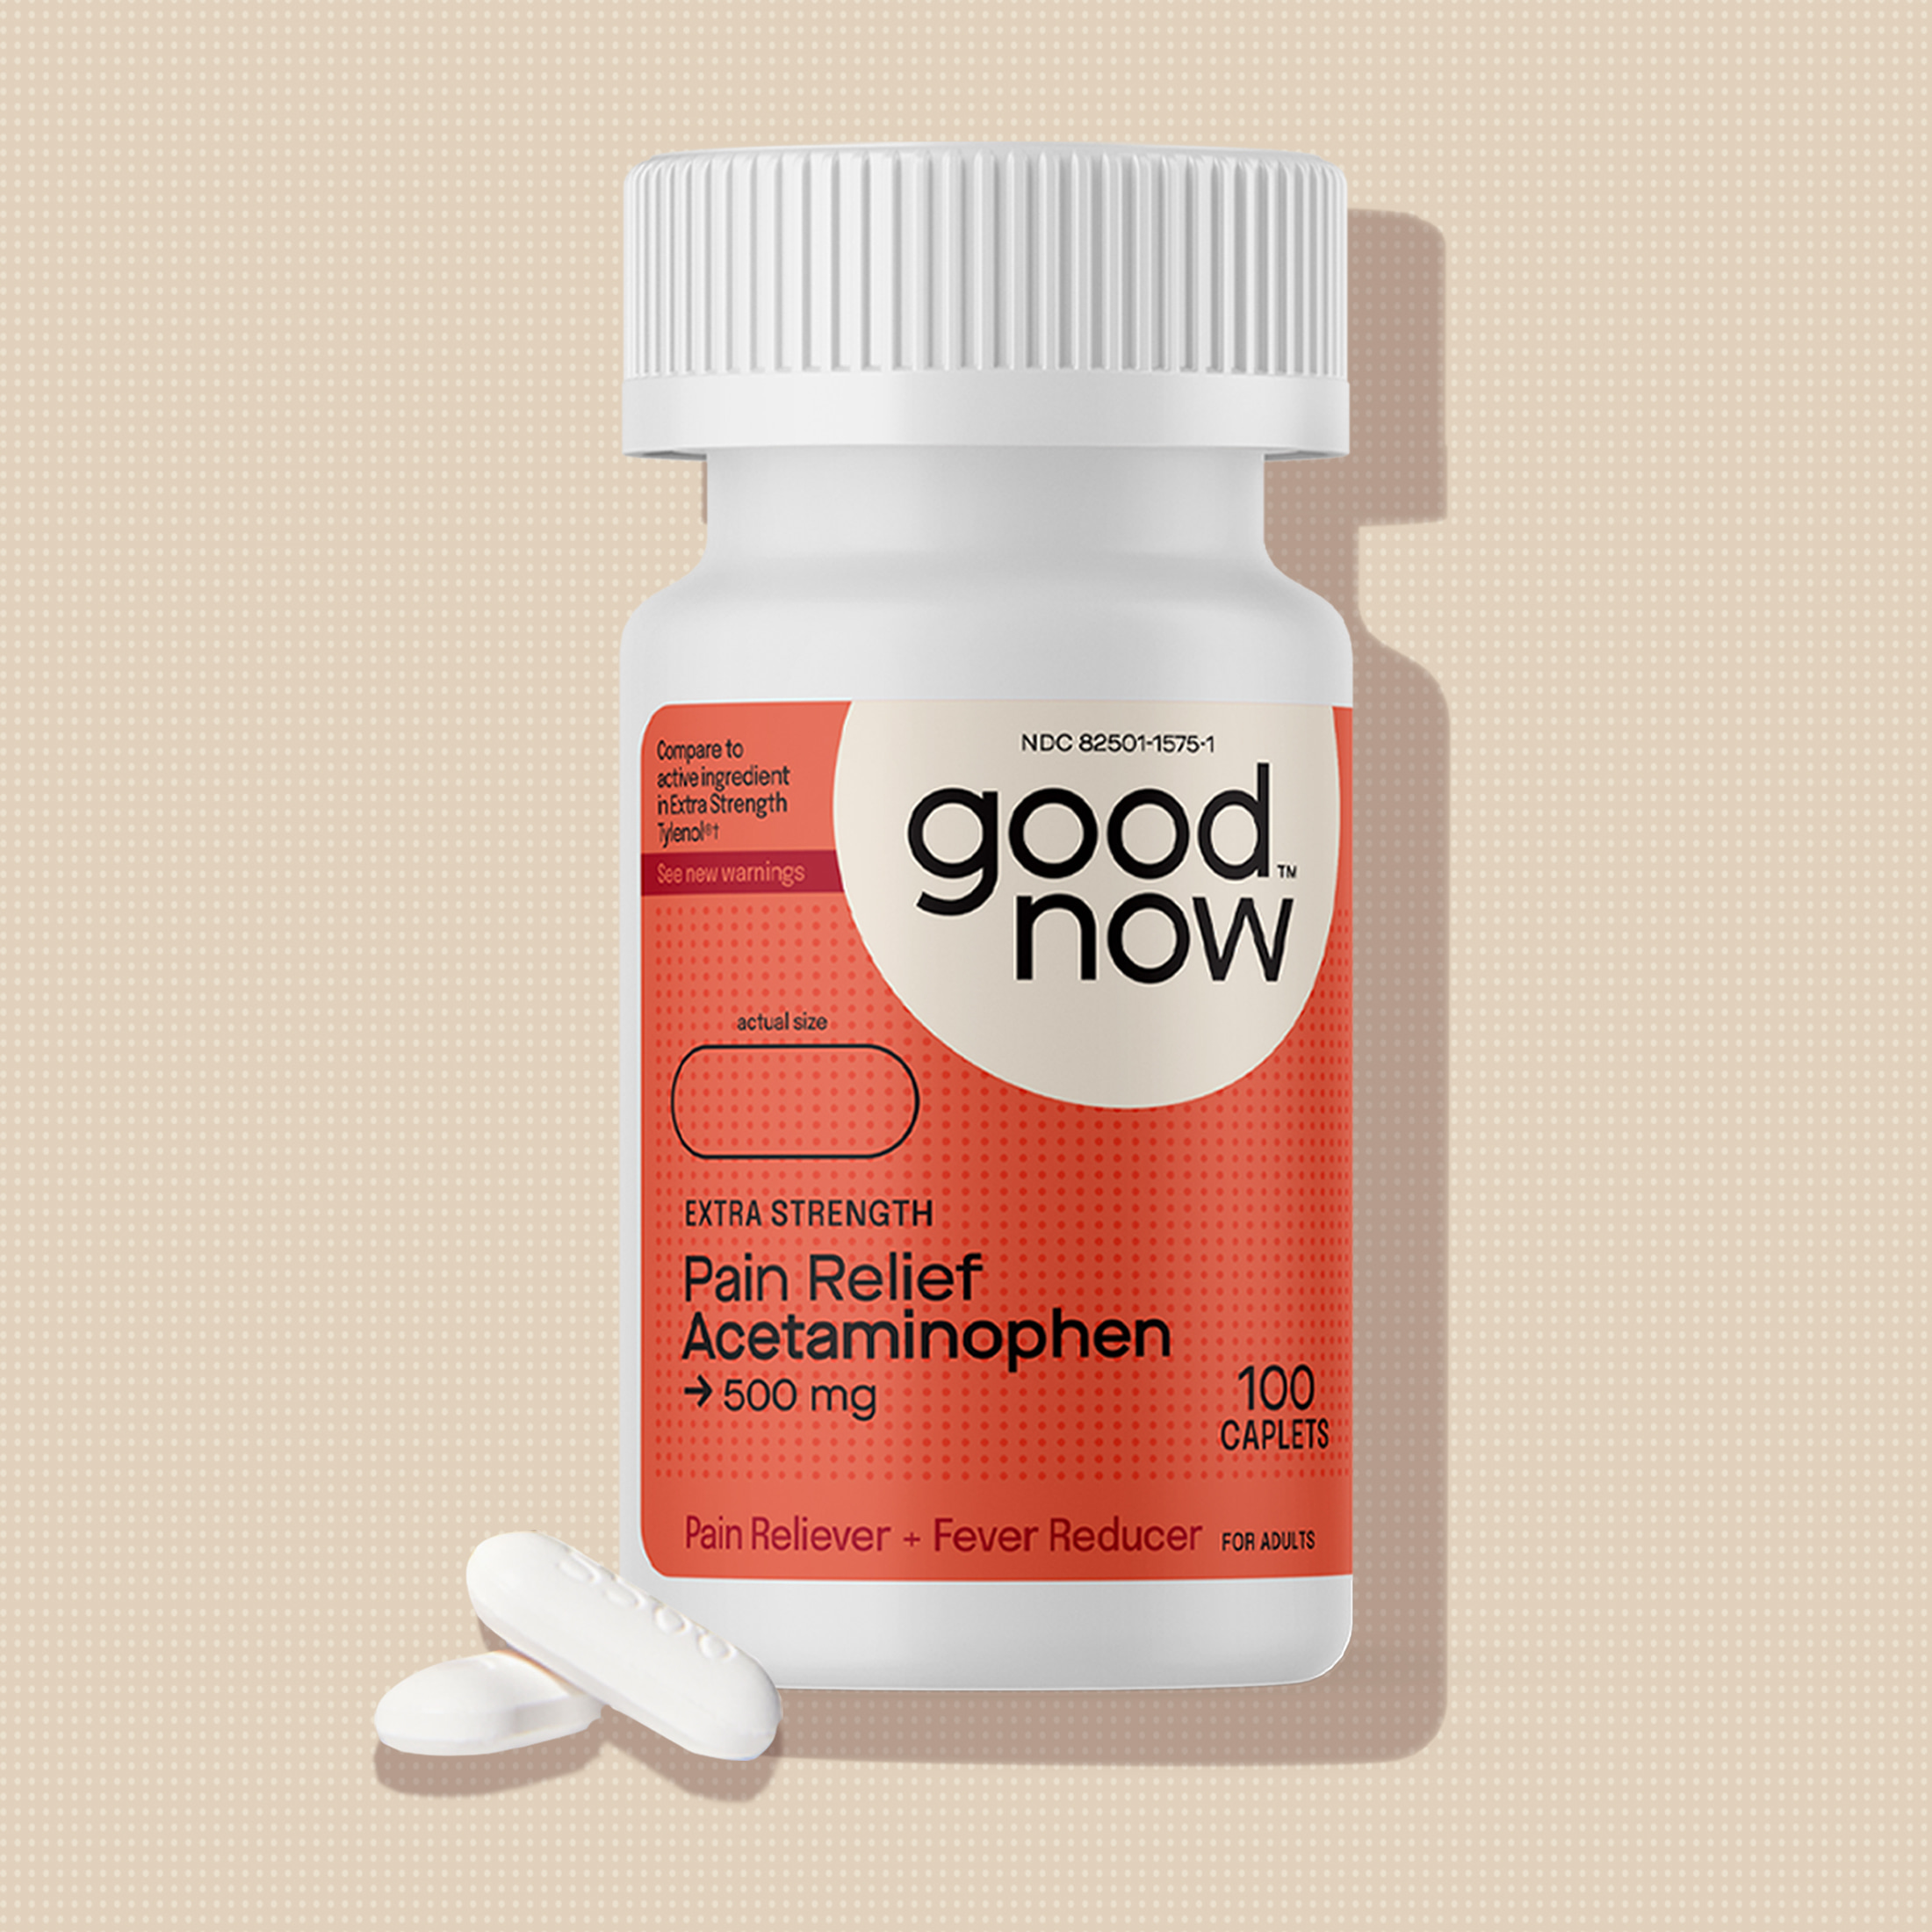 Goodnow Stylish Health Packaging Redefined